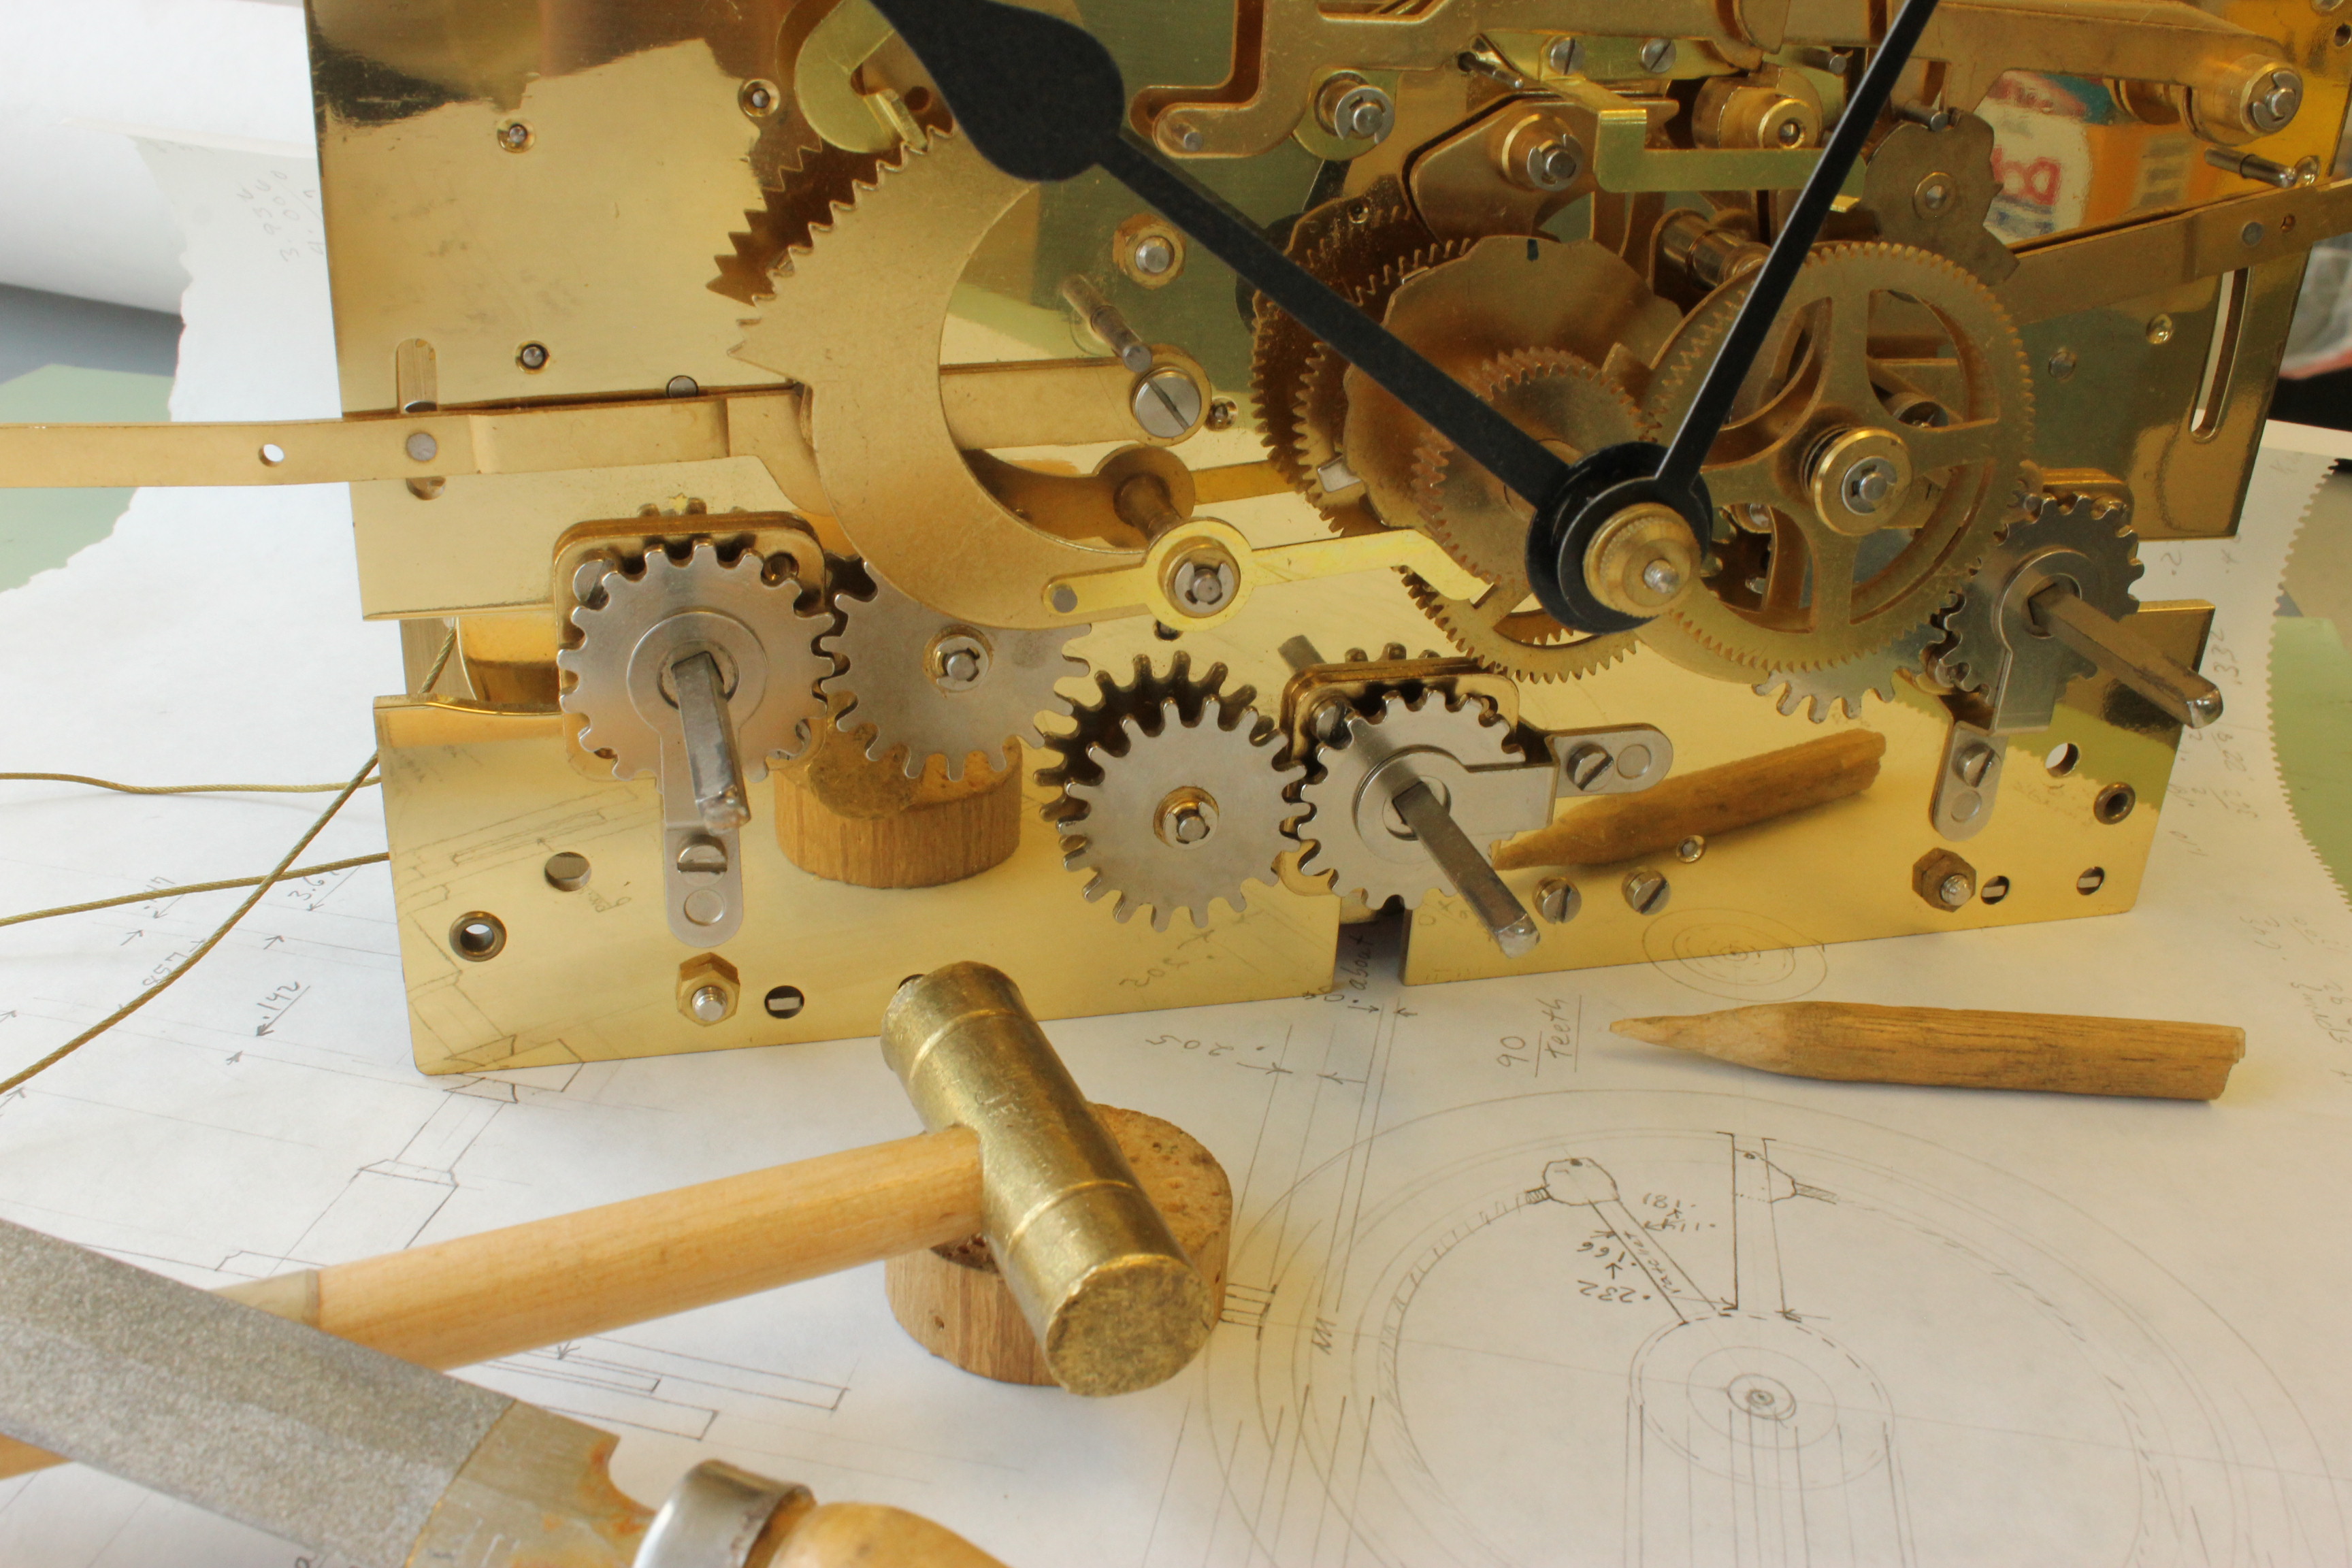 Making Time: The American Watchmakers-Clockmakers Institute